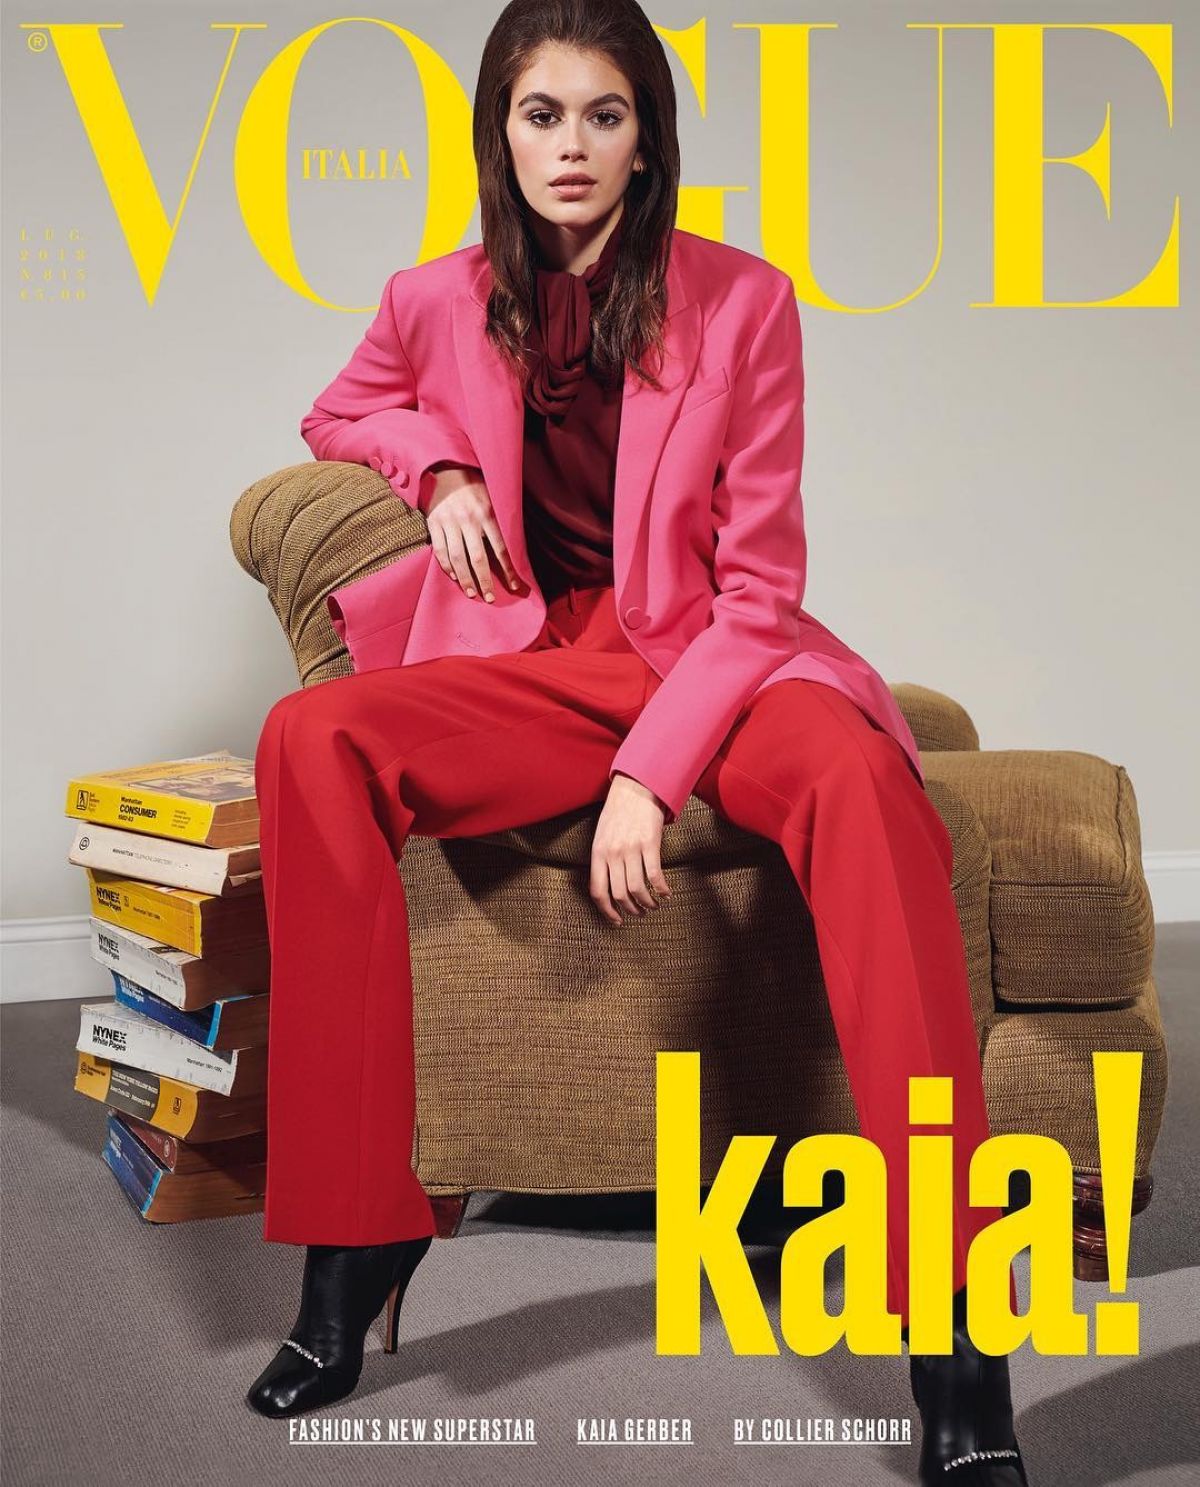 kaia-gerber-in-vogue-magazine-italy-july-2018-0.jpg